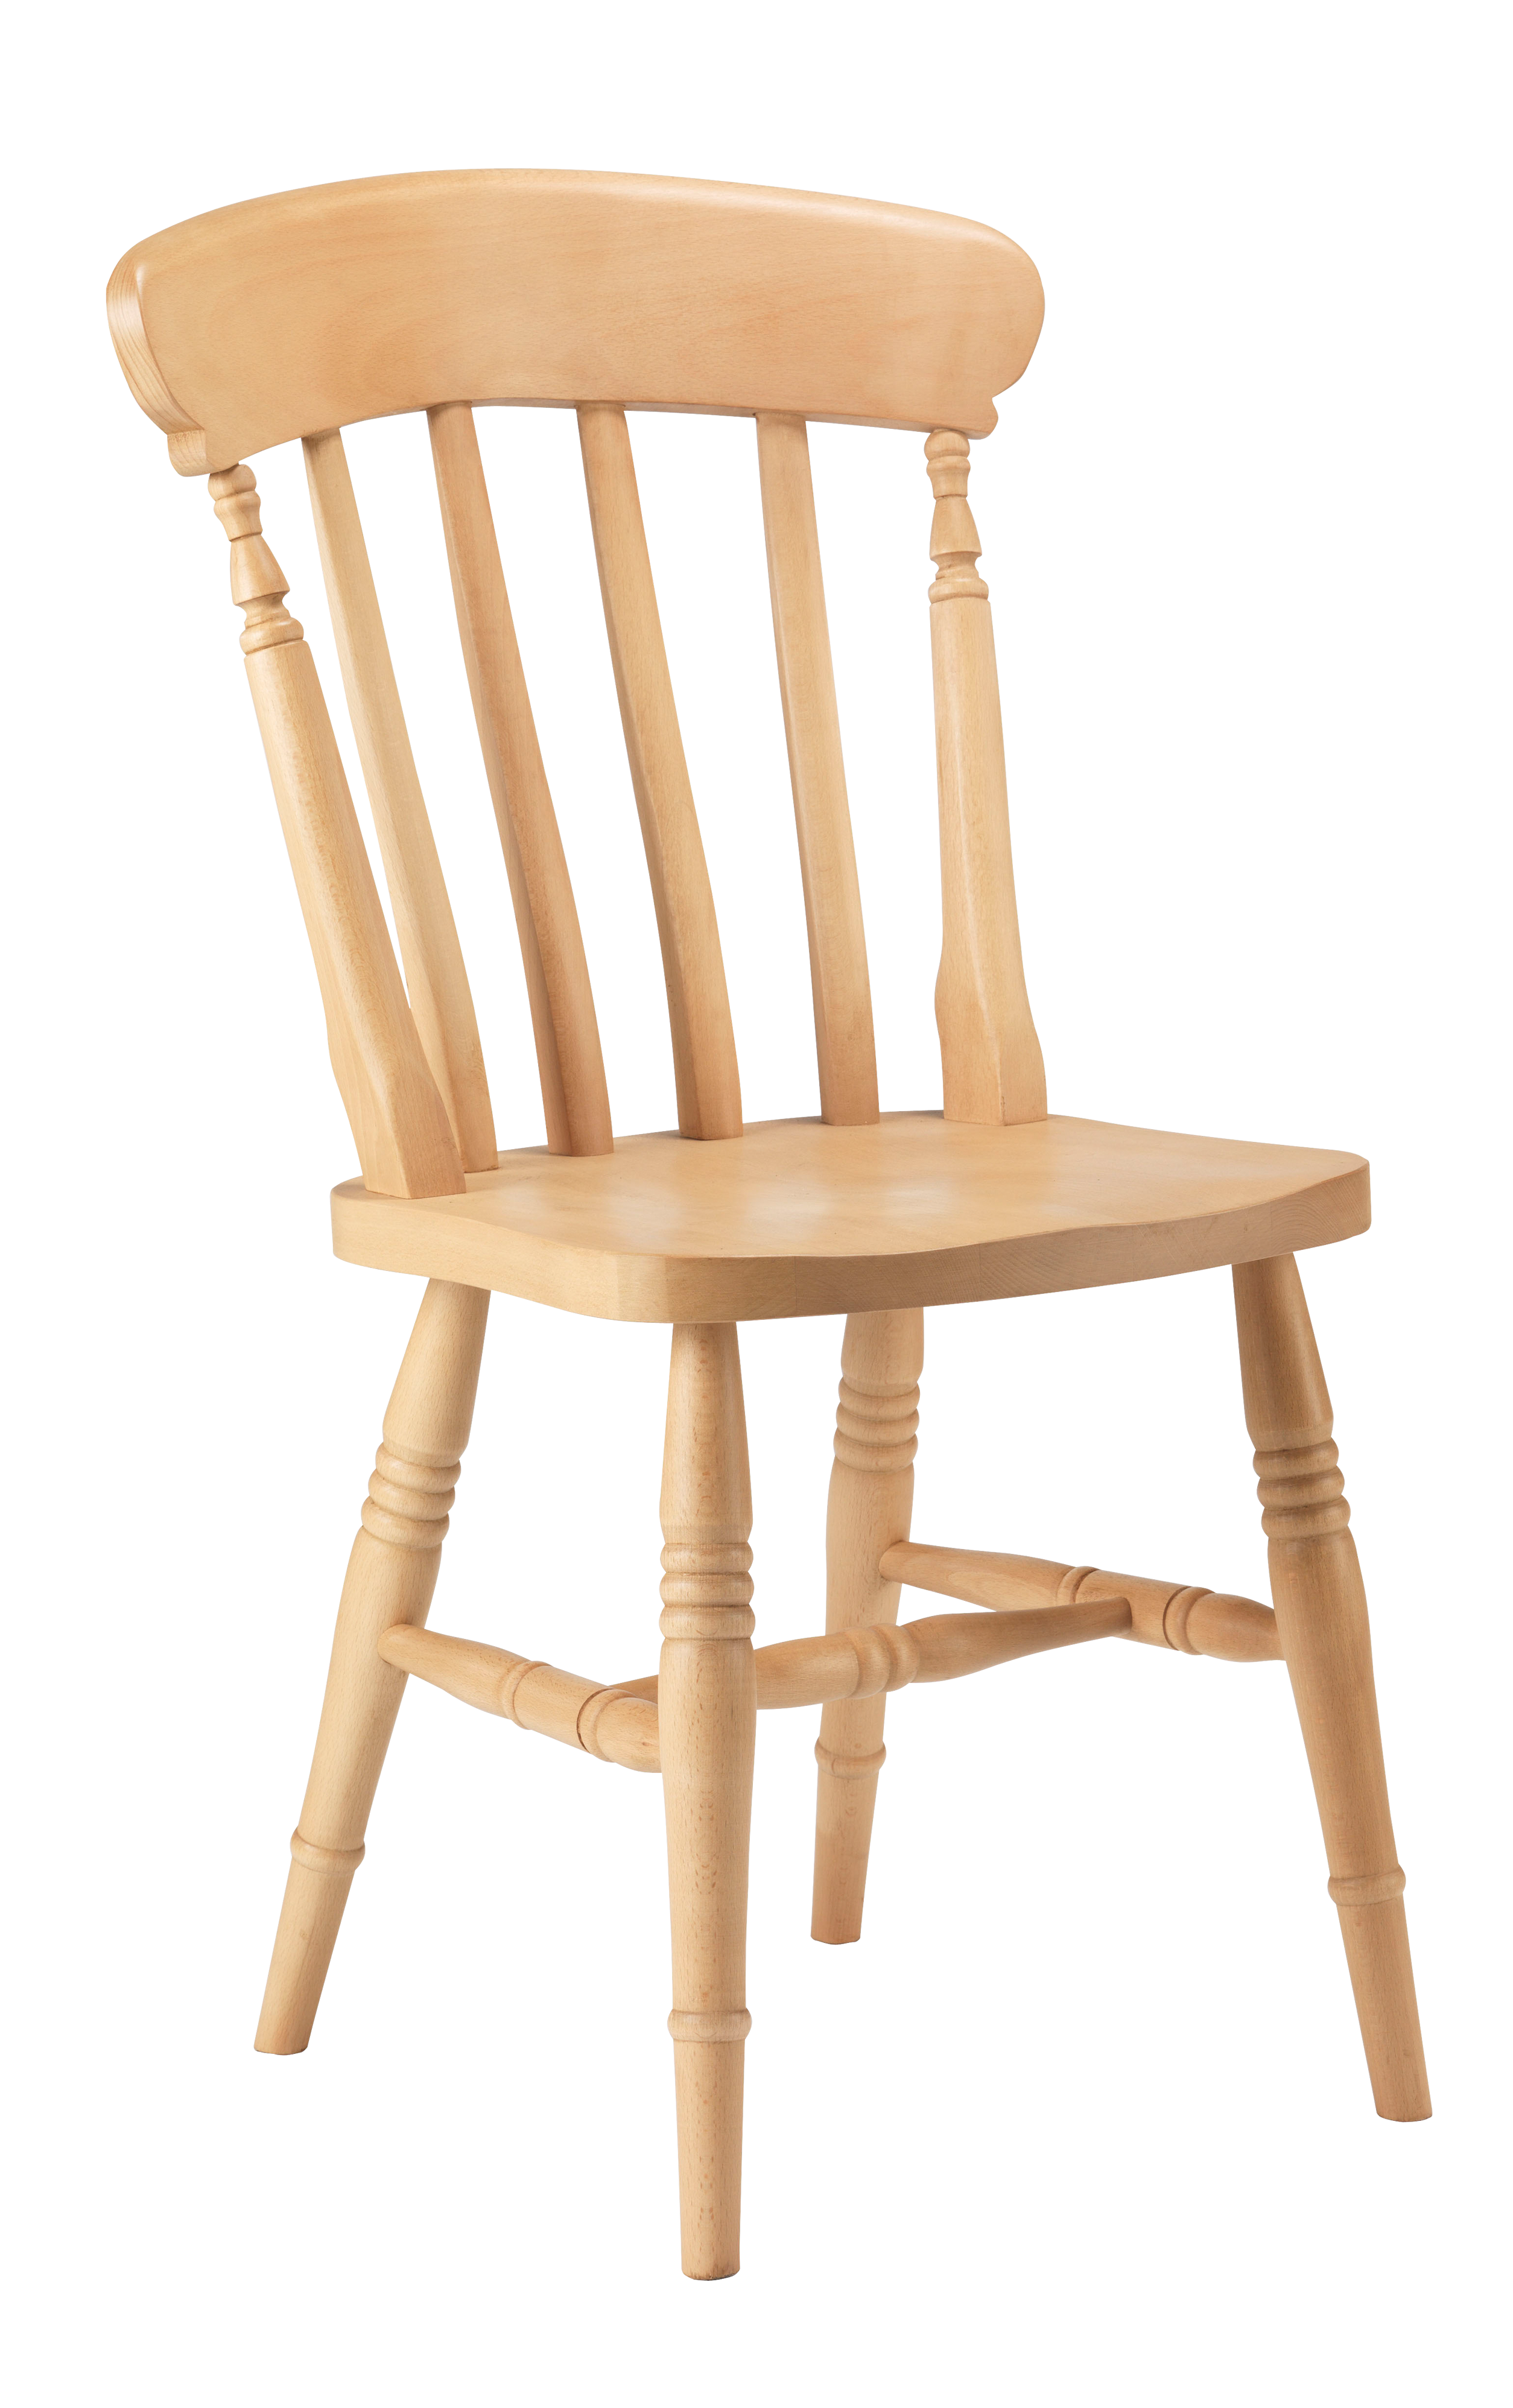 Chair Wooden PNG HD 